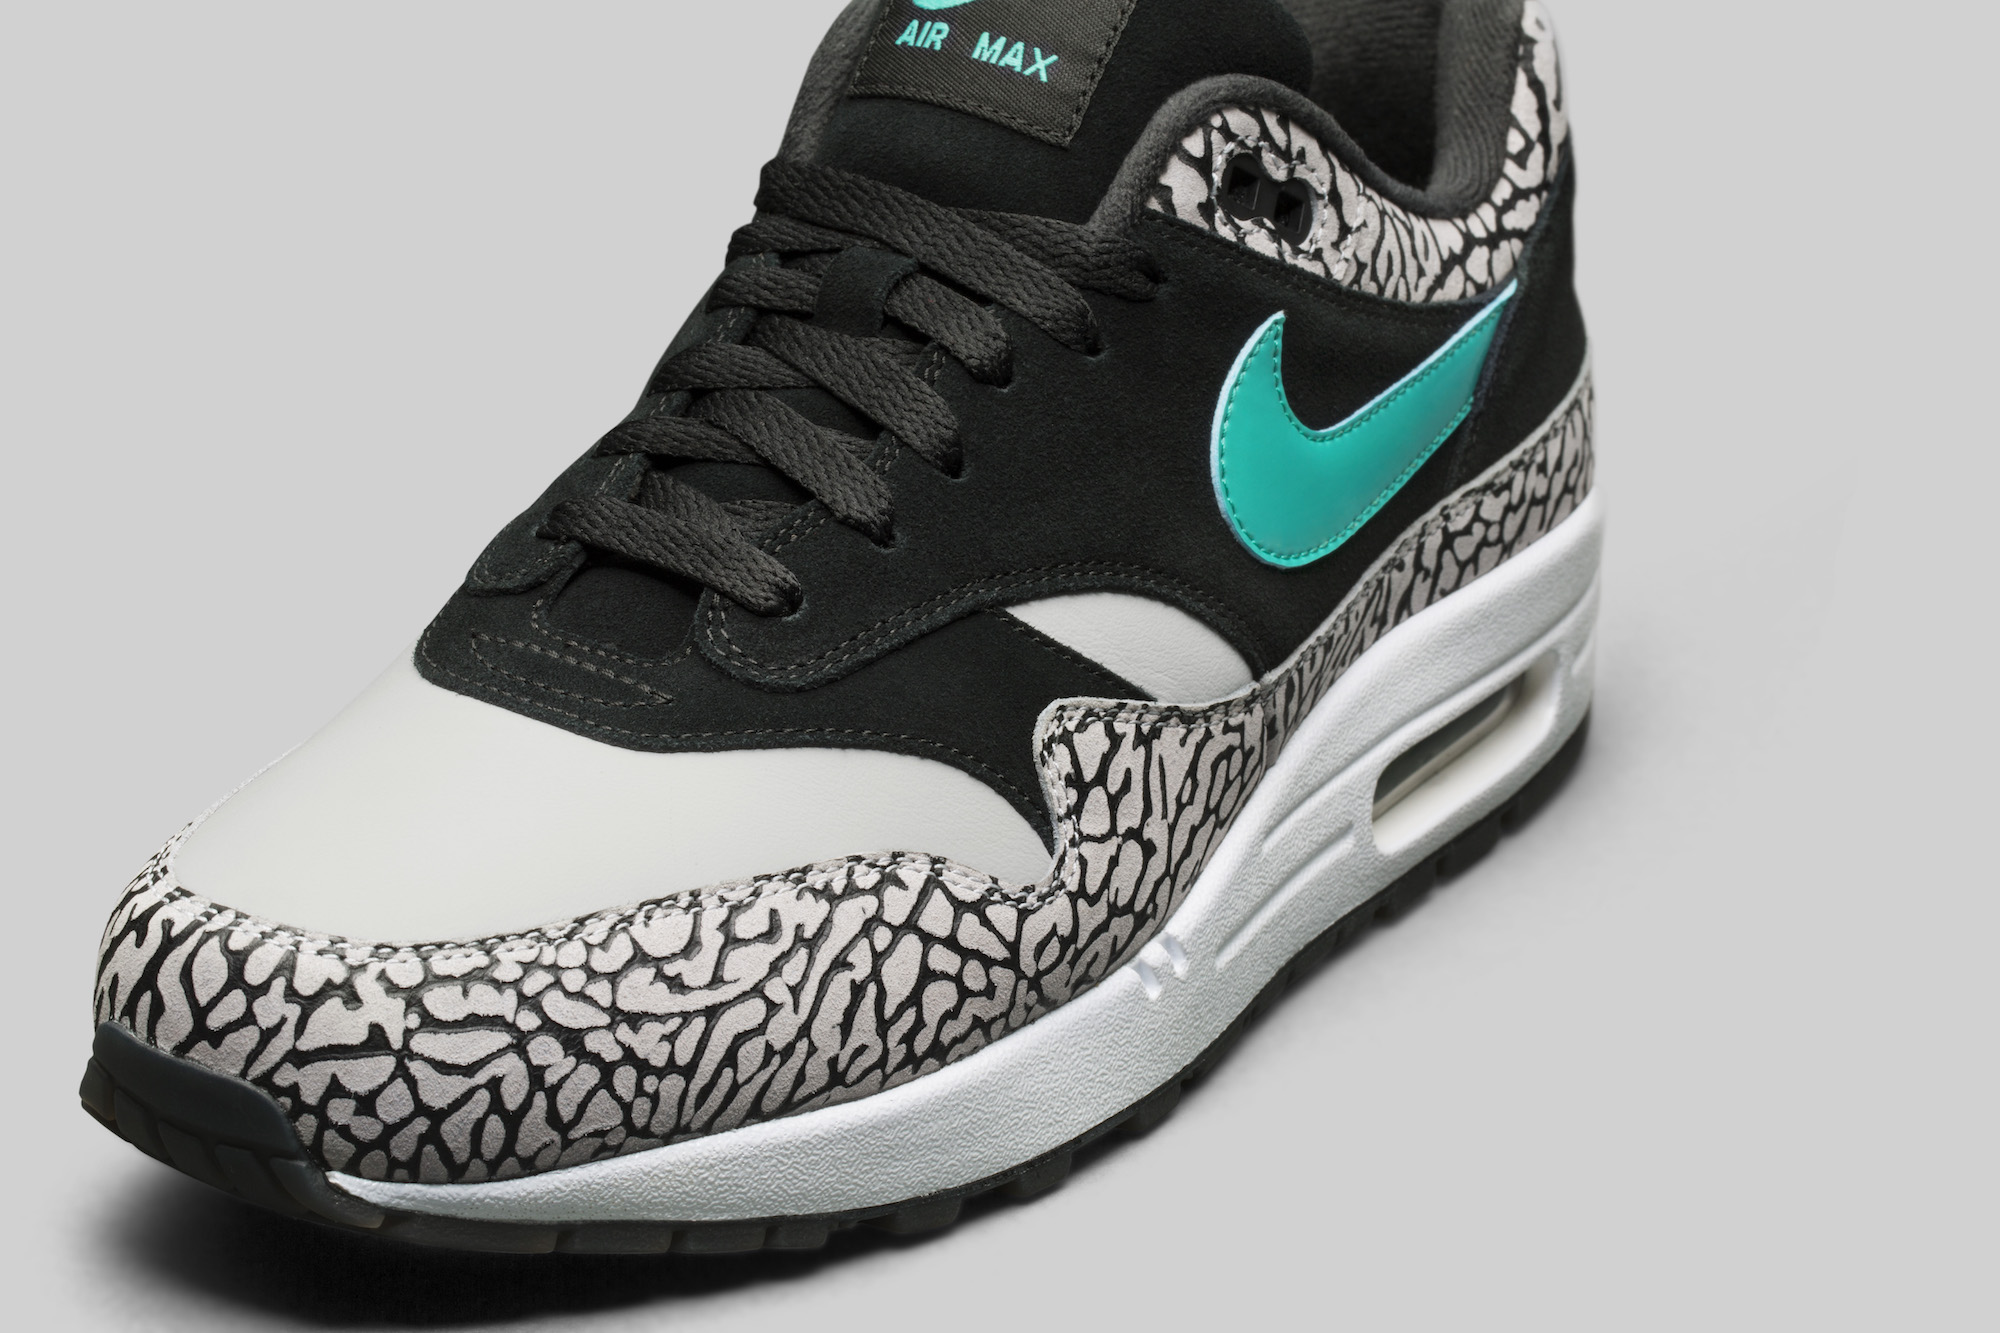 The atmos Air Max 1 x Jordan III Pack Has an Official Release Date